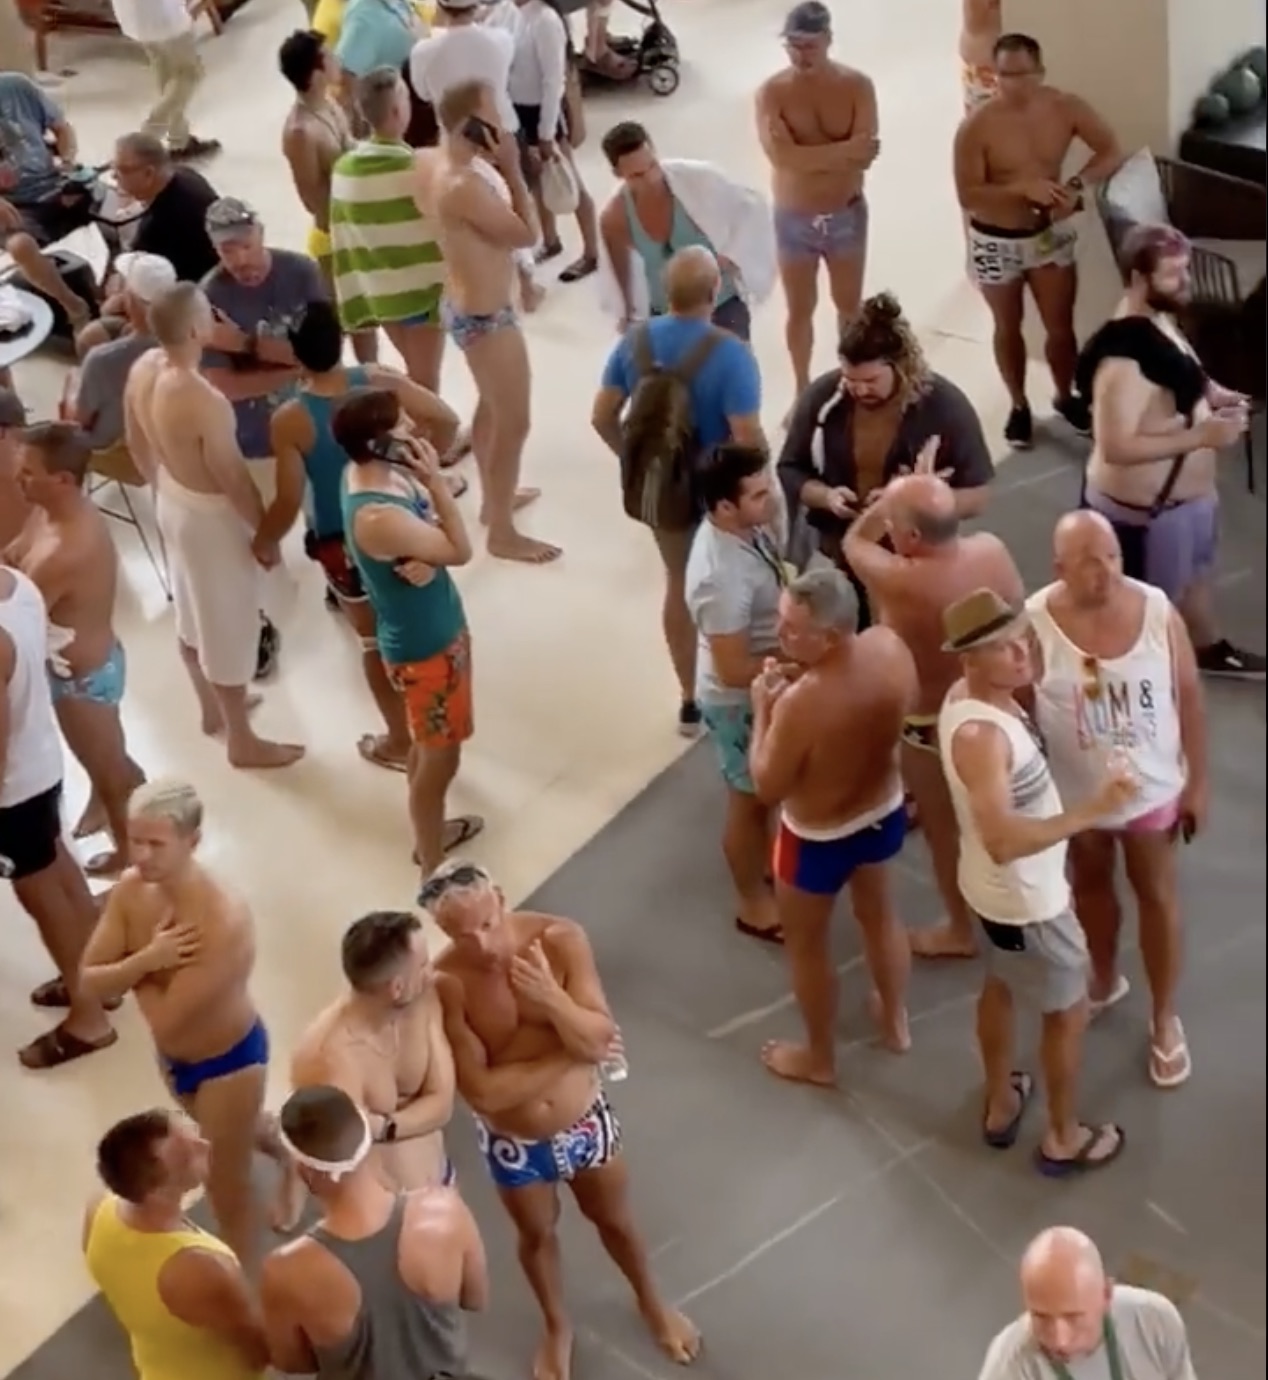 a group of people in swimsuits